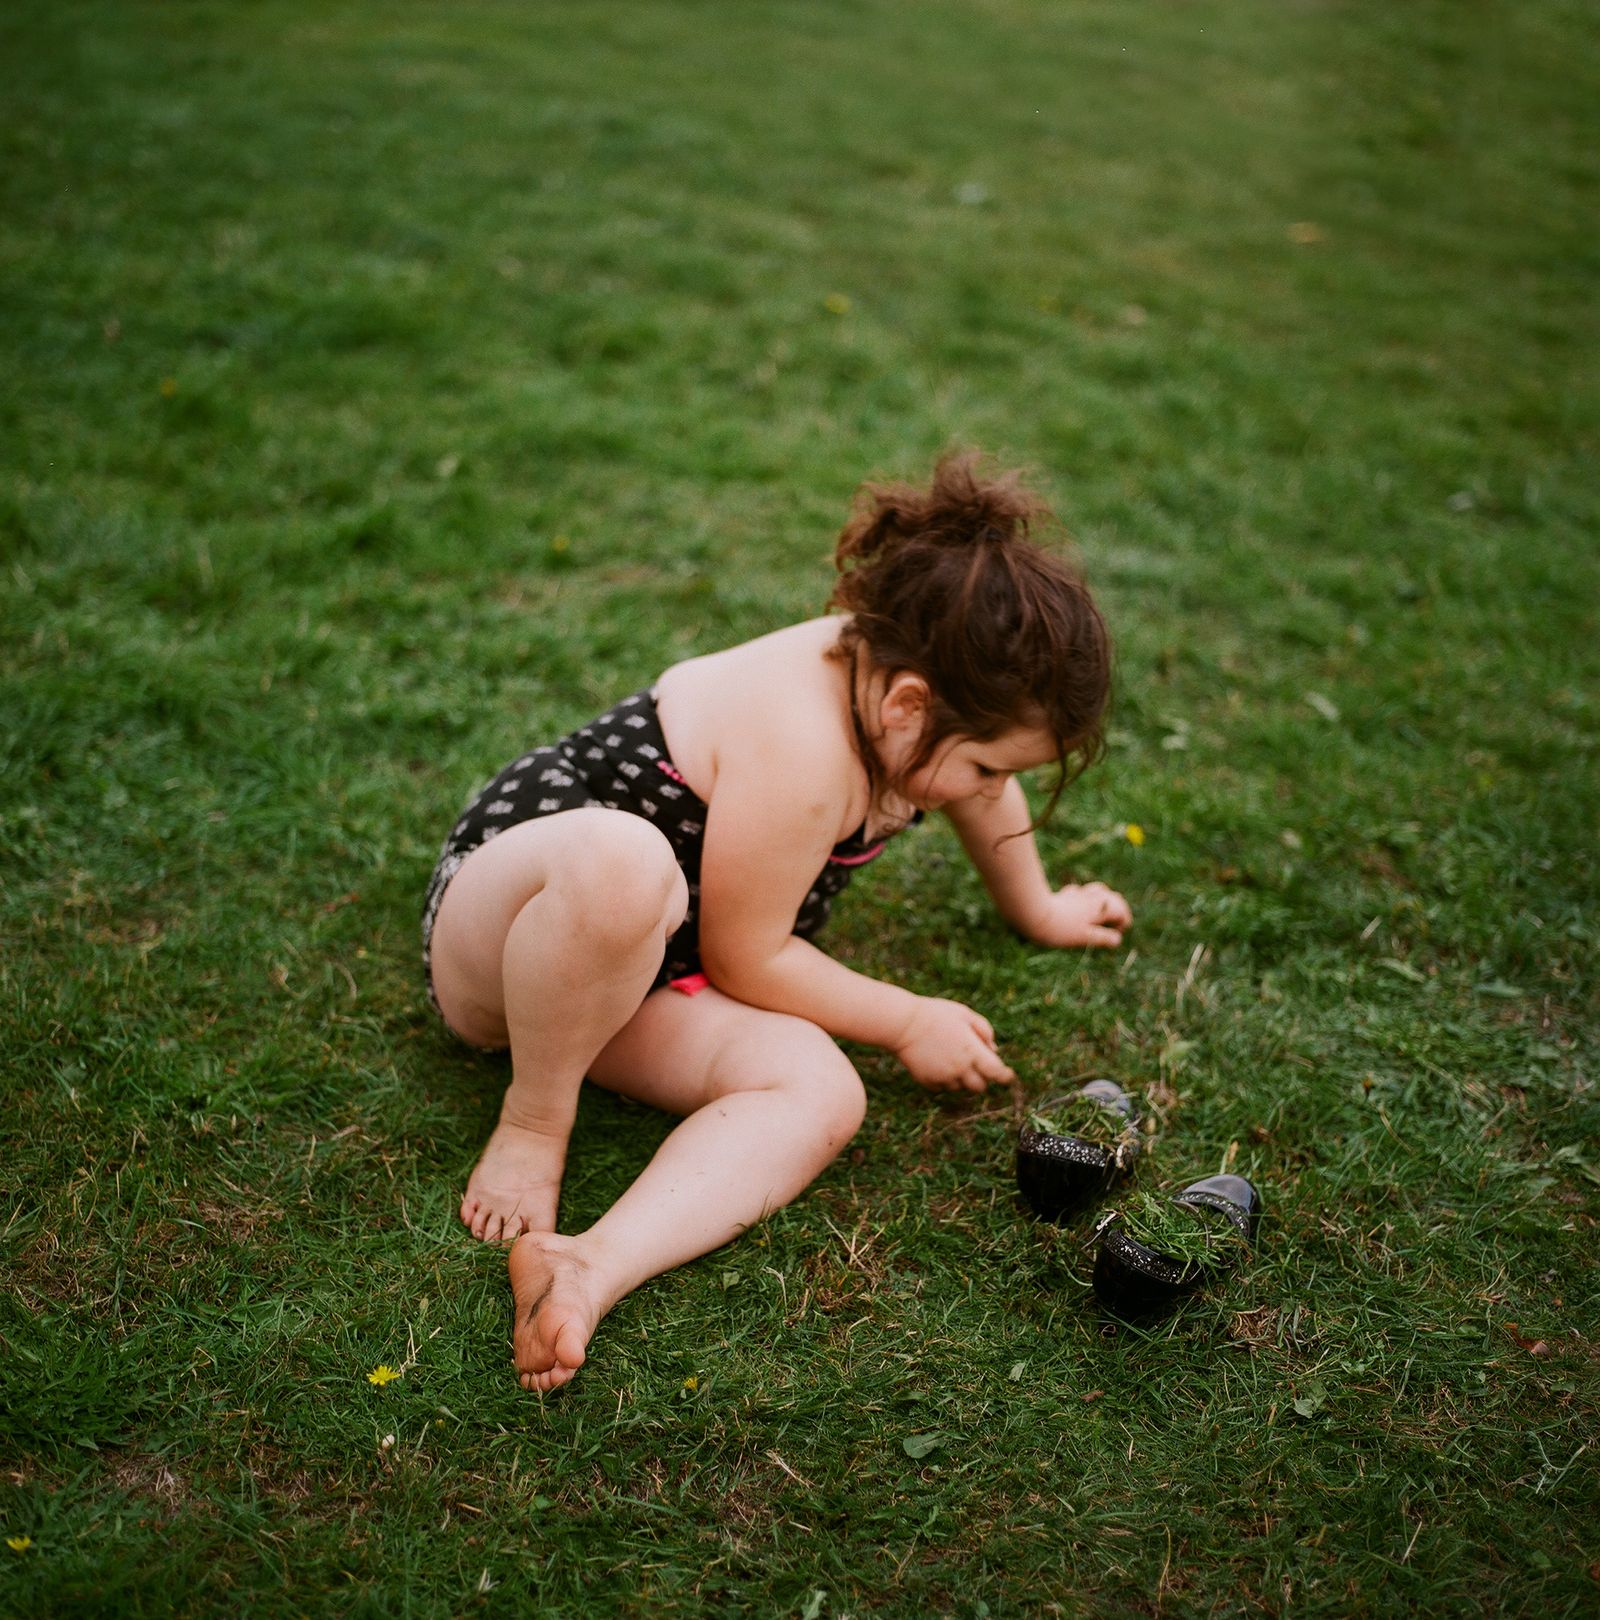 © Laura Pannack - Image from the The Cracker photography project